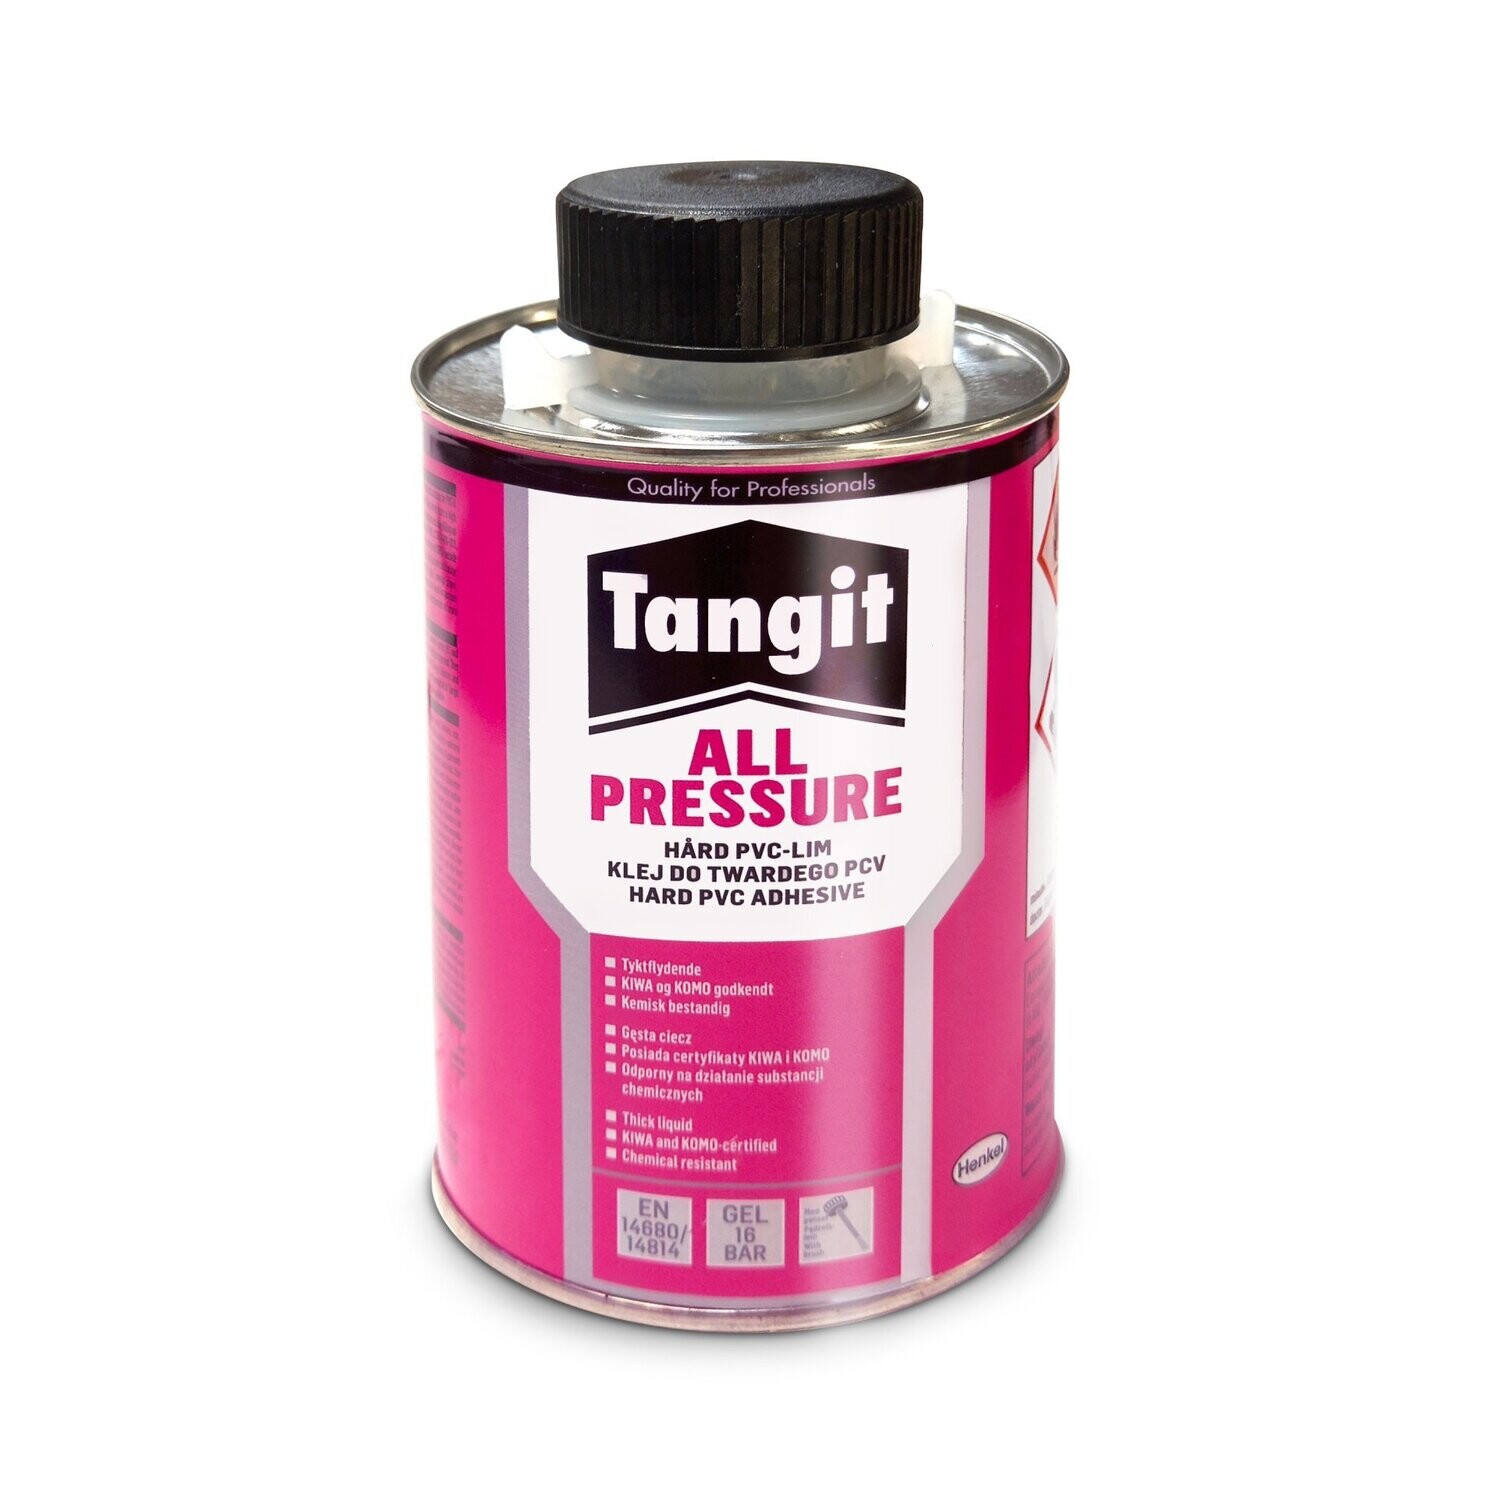 Tangit All Pressure PVCU Cement - 500ml Tin with Brush